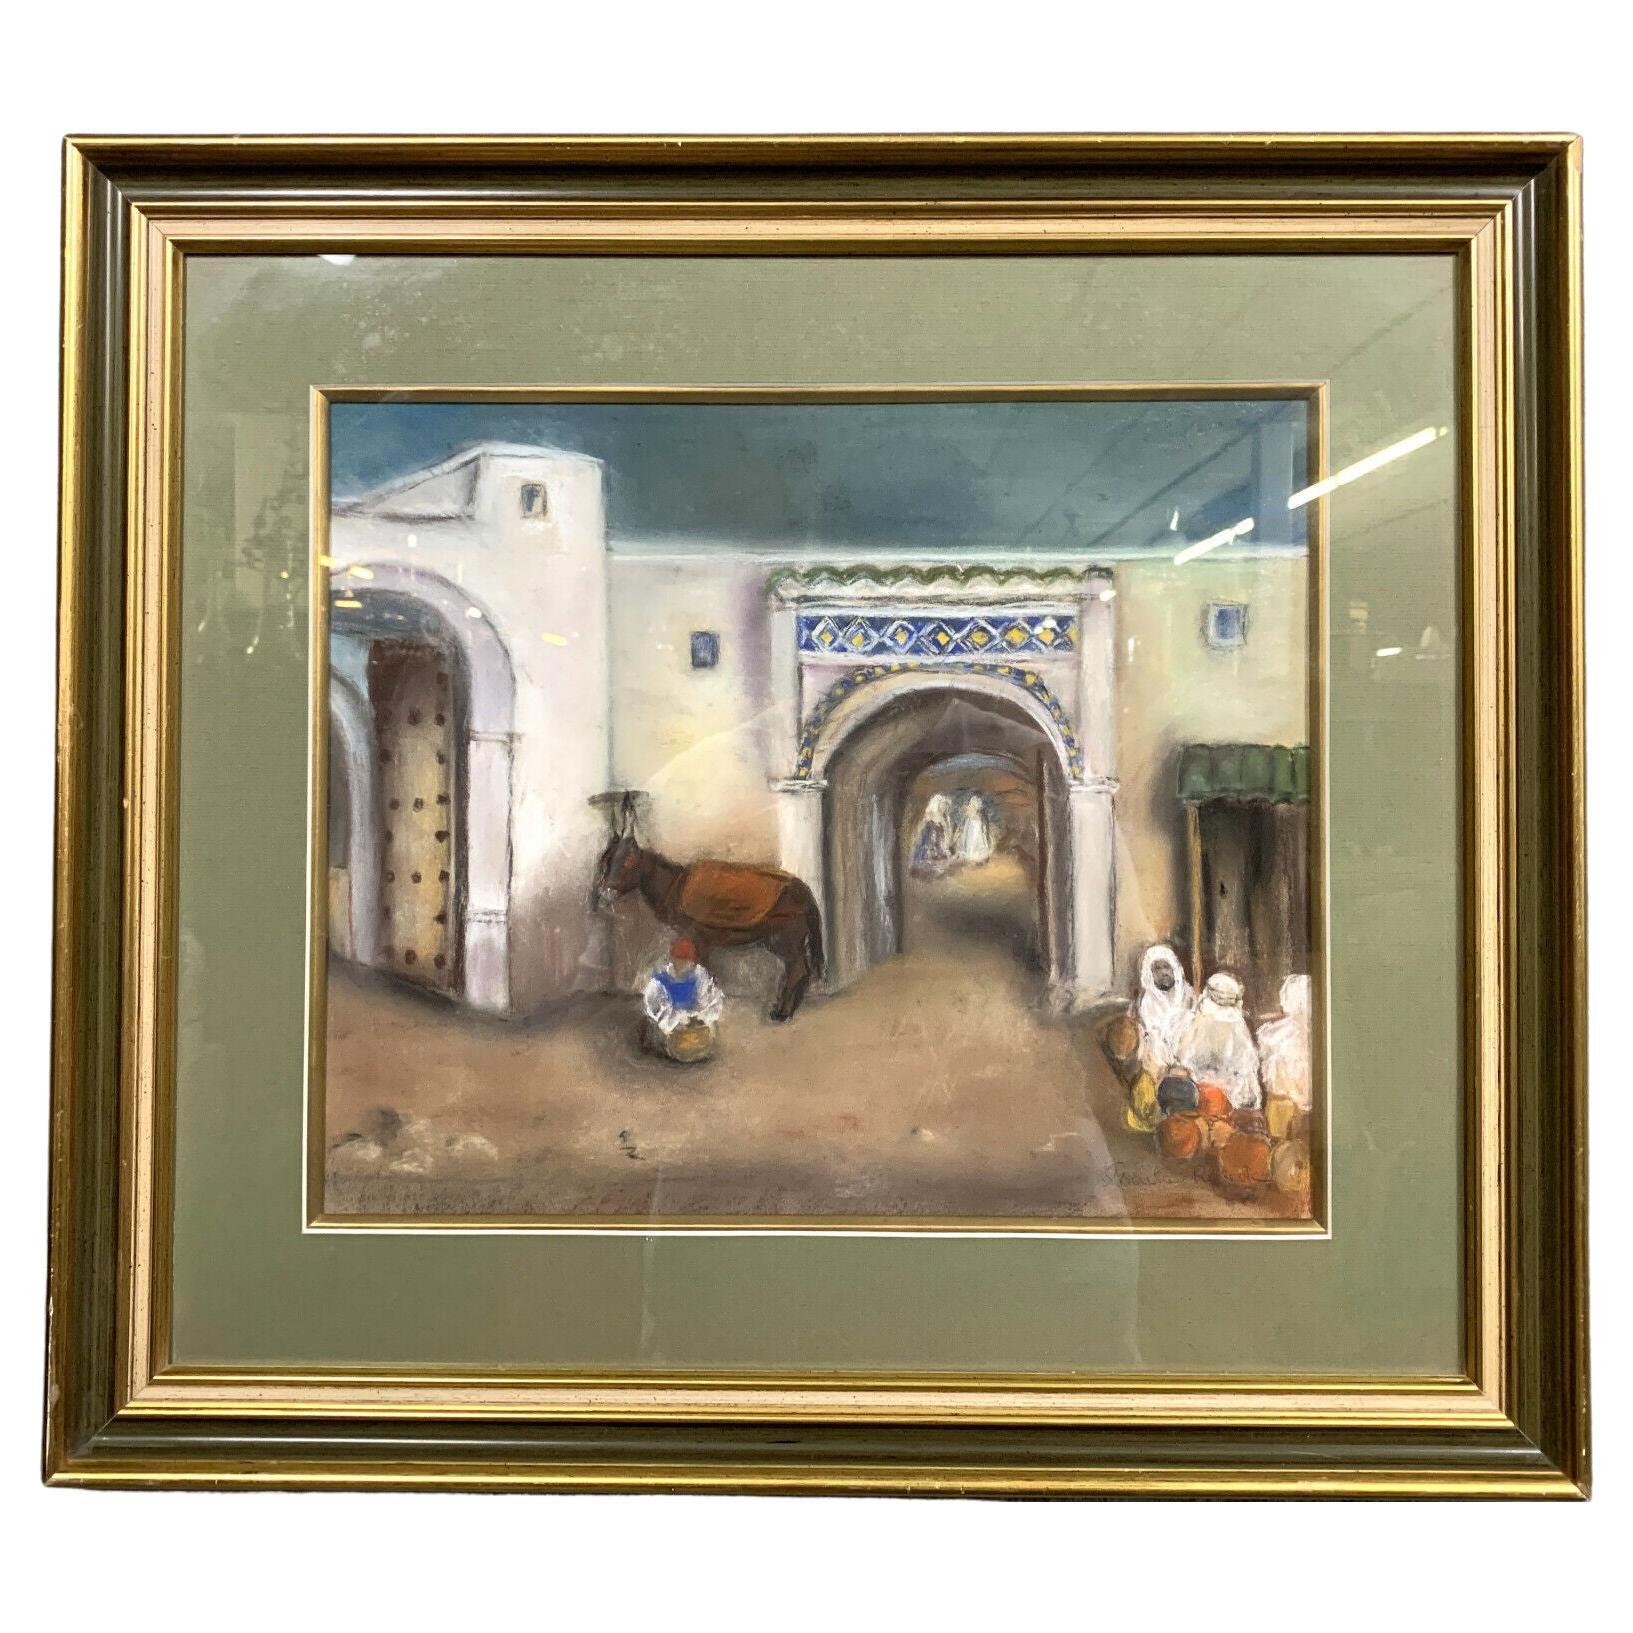 Orientalist School of the 20th Century, Signed by Roberte: Animated Medina -1X35 For Sale